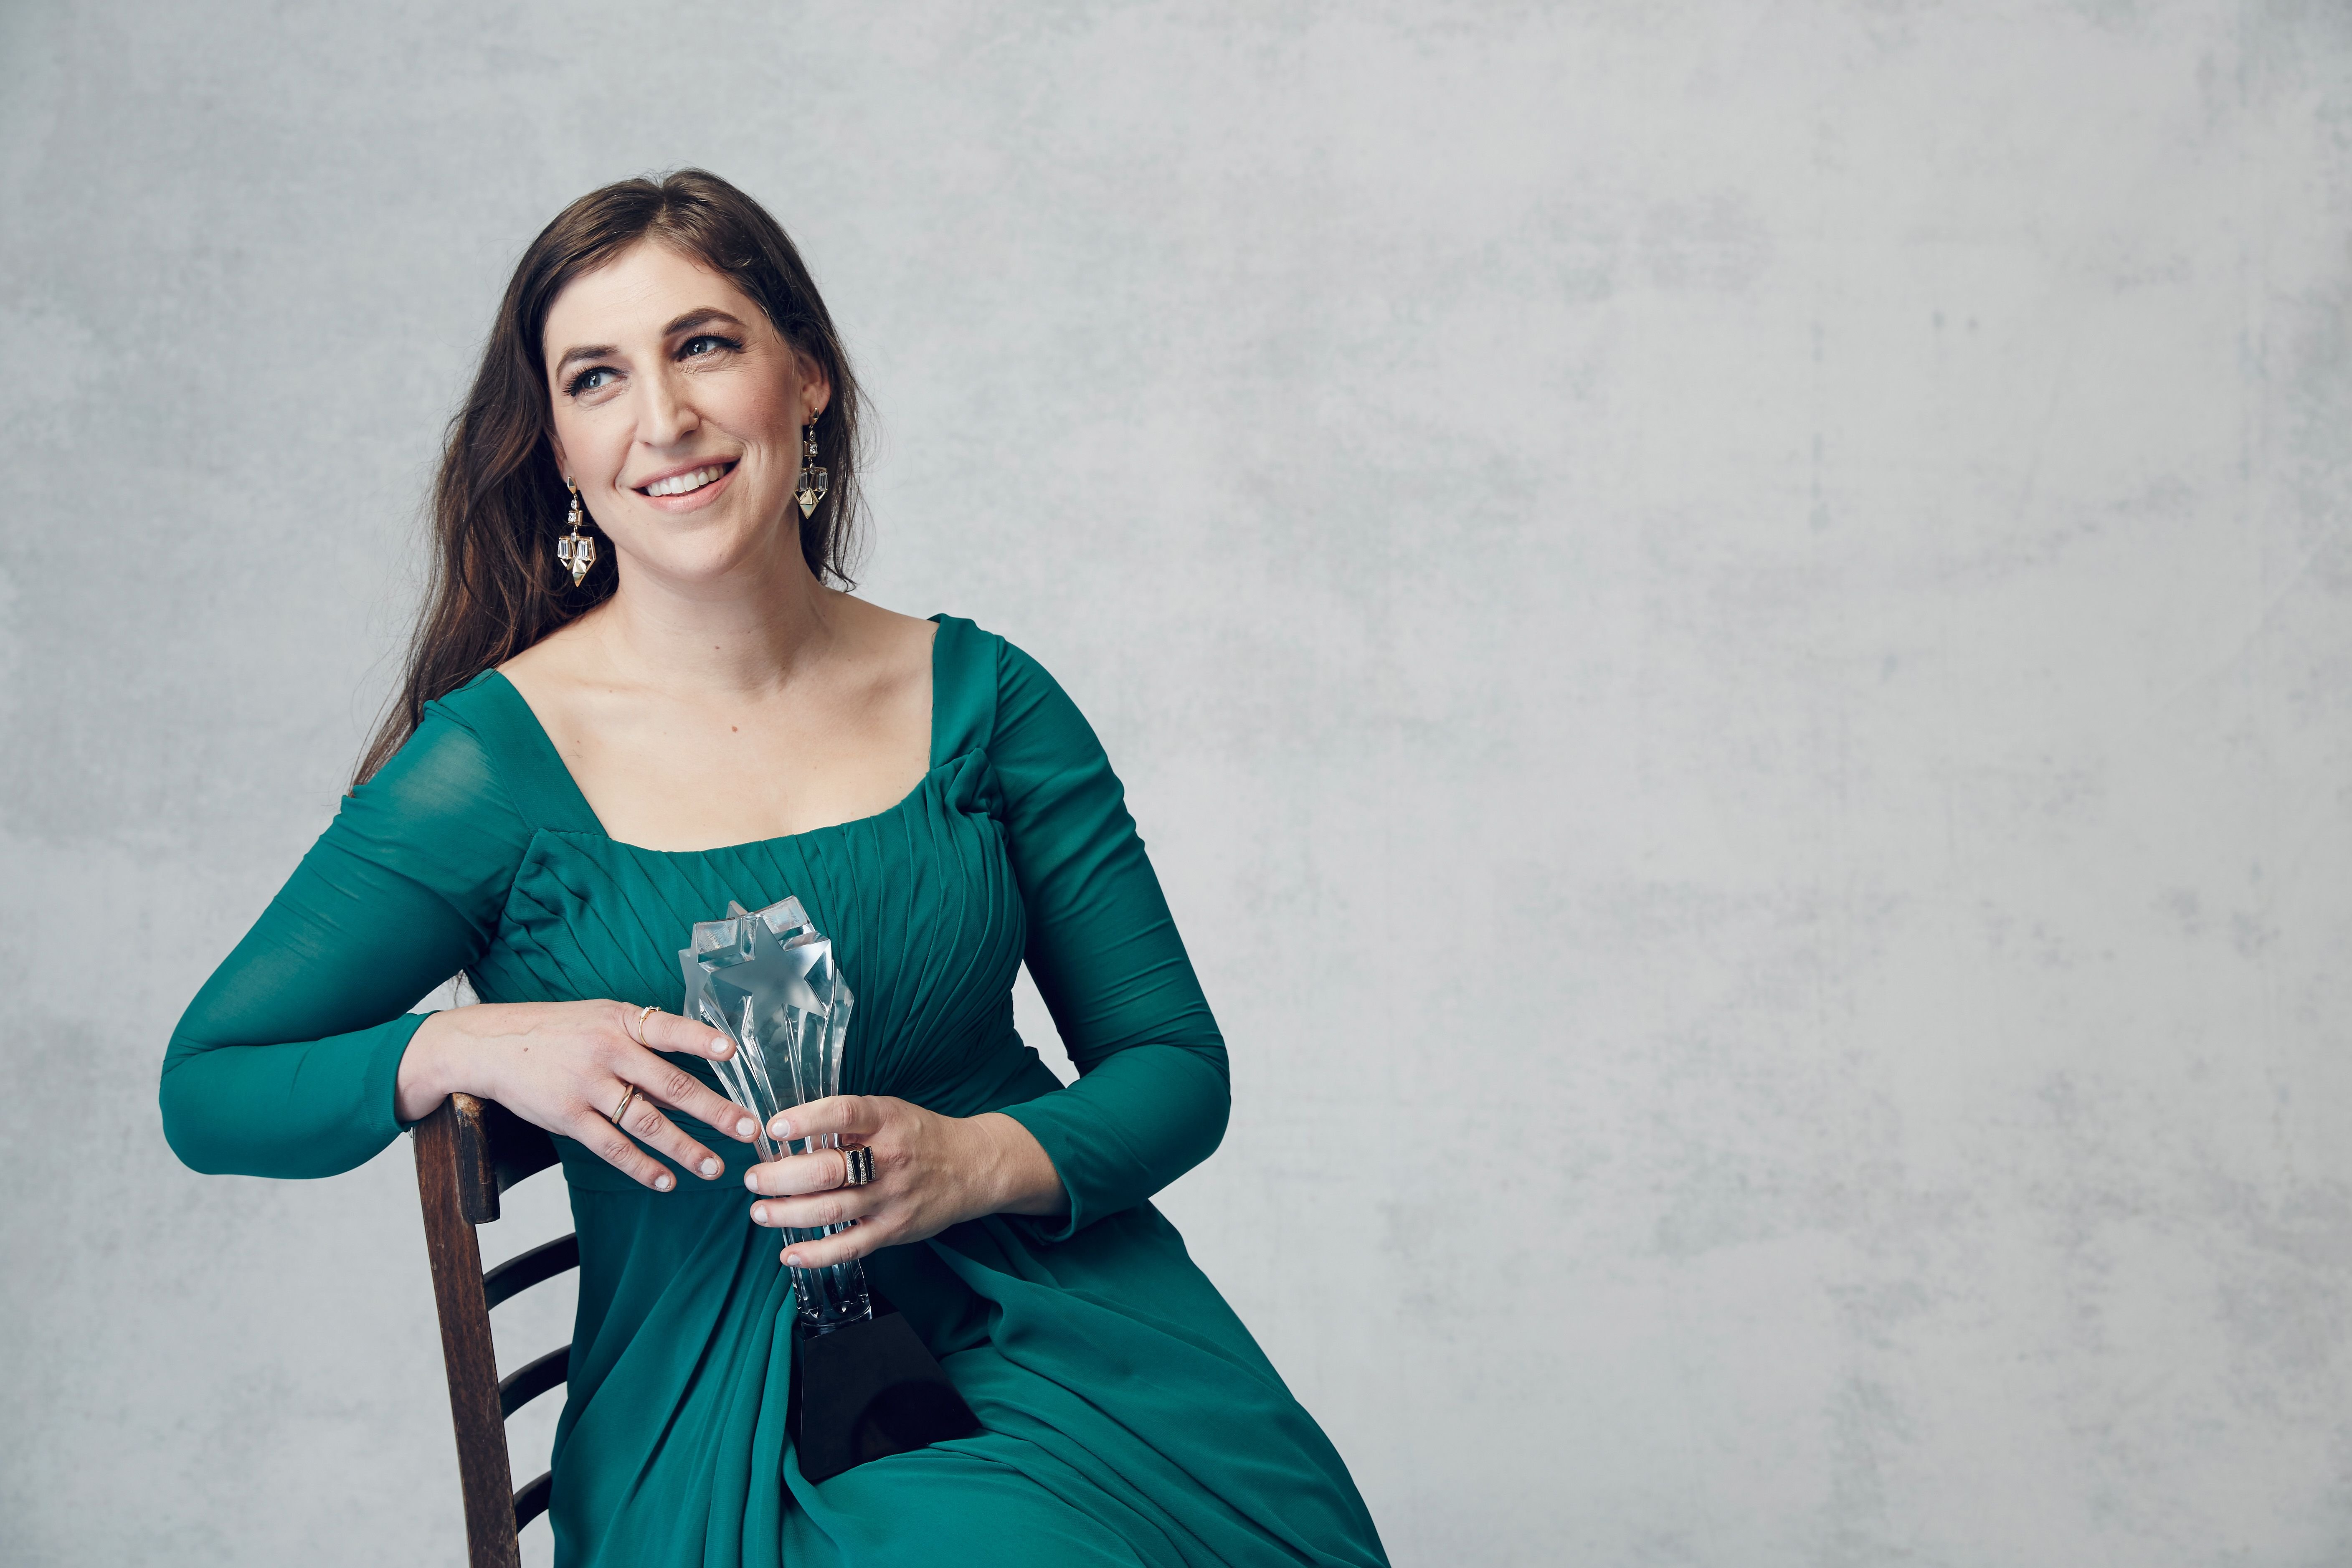 Mayim Bialik poses for a portrait during the 21st Annual Critics' Choice Awards on January 17, 2016, in Santa Monica, California. | Photo: Getty Images